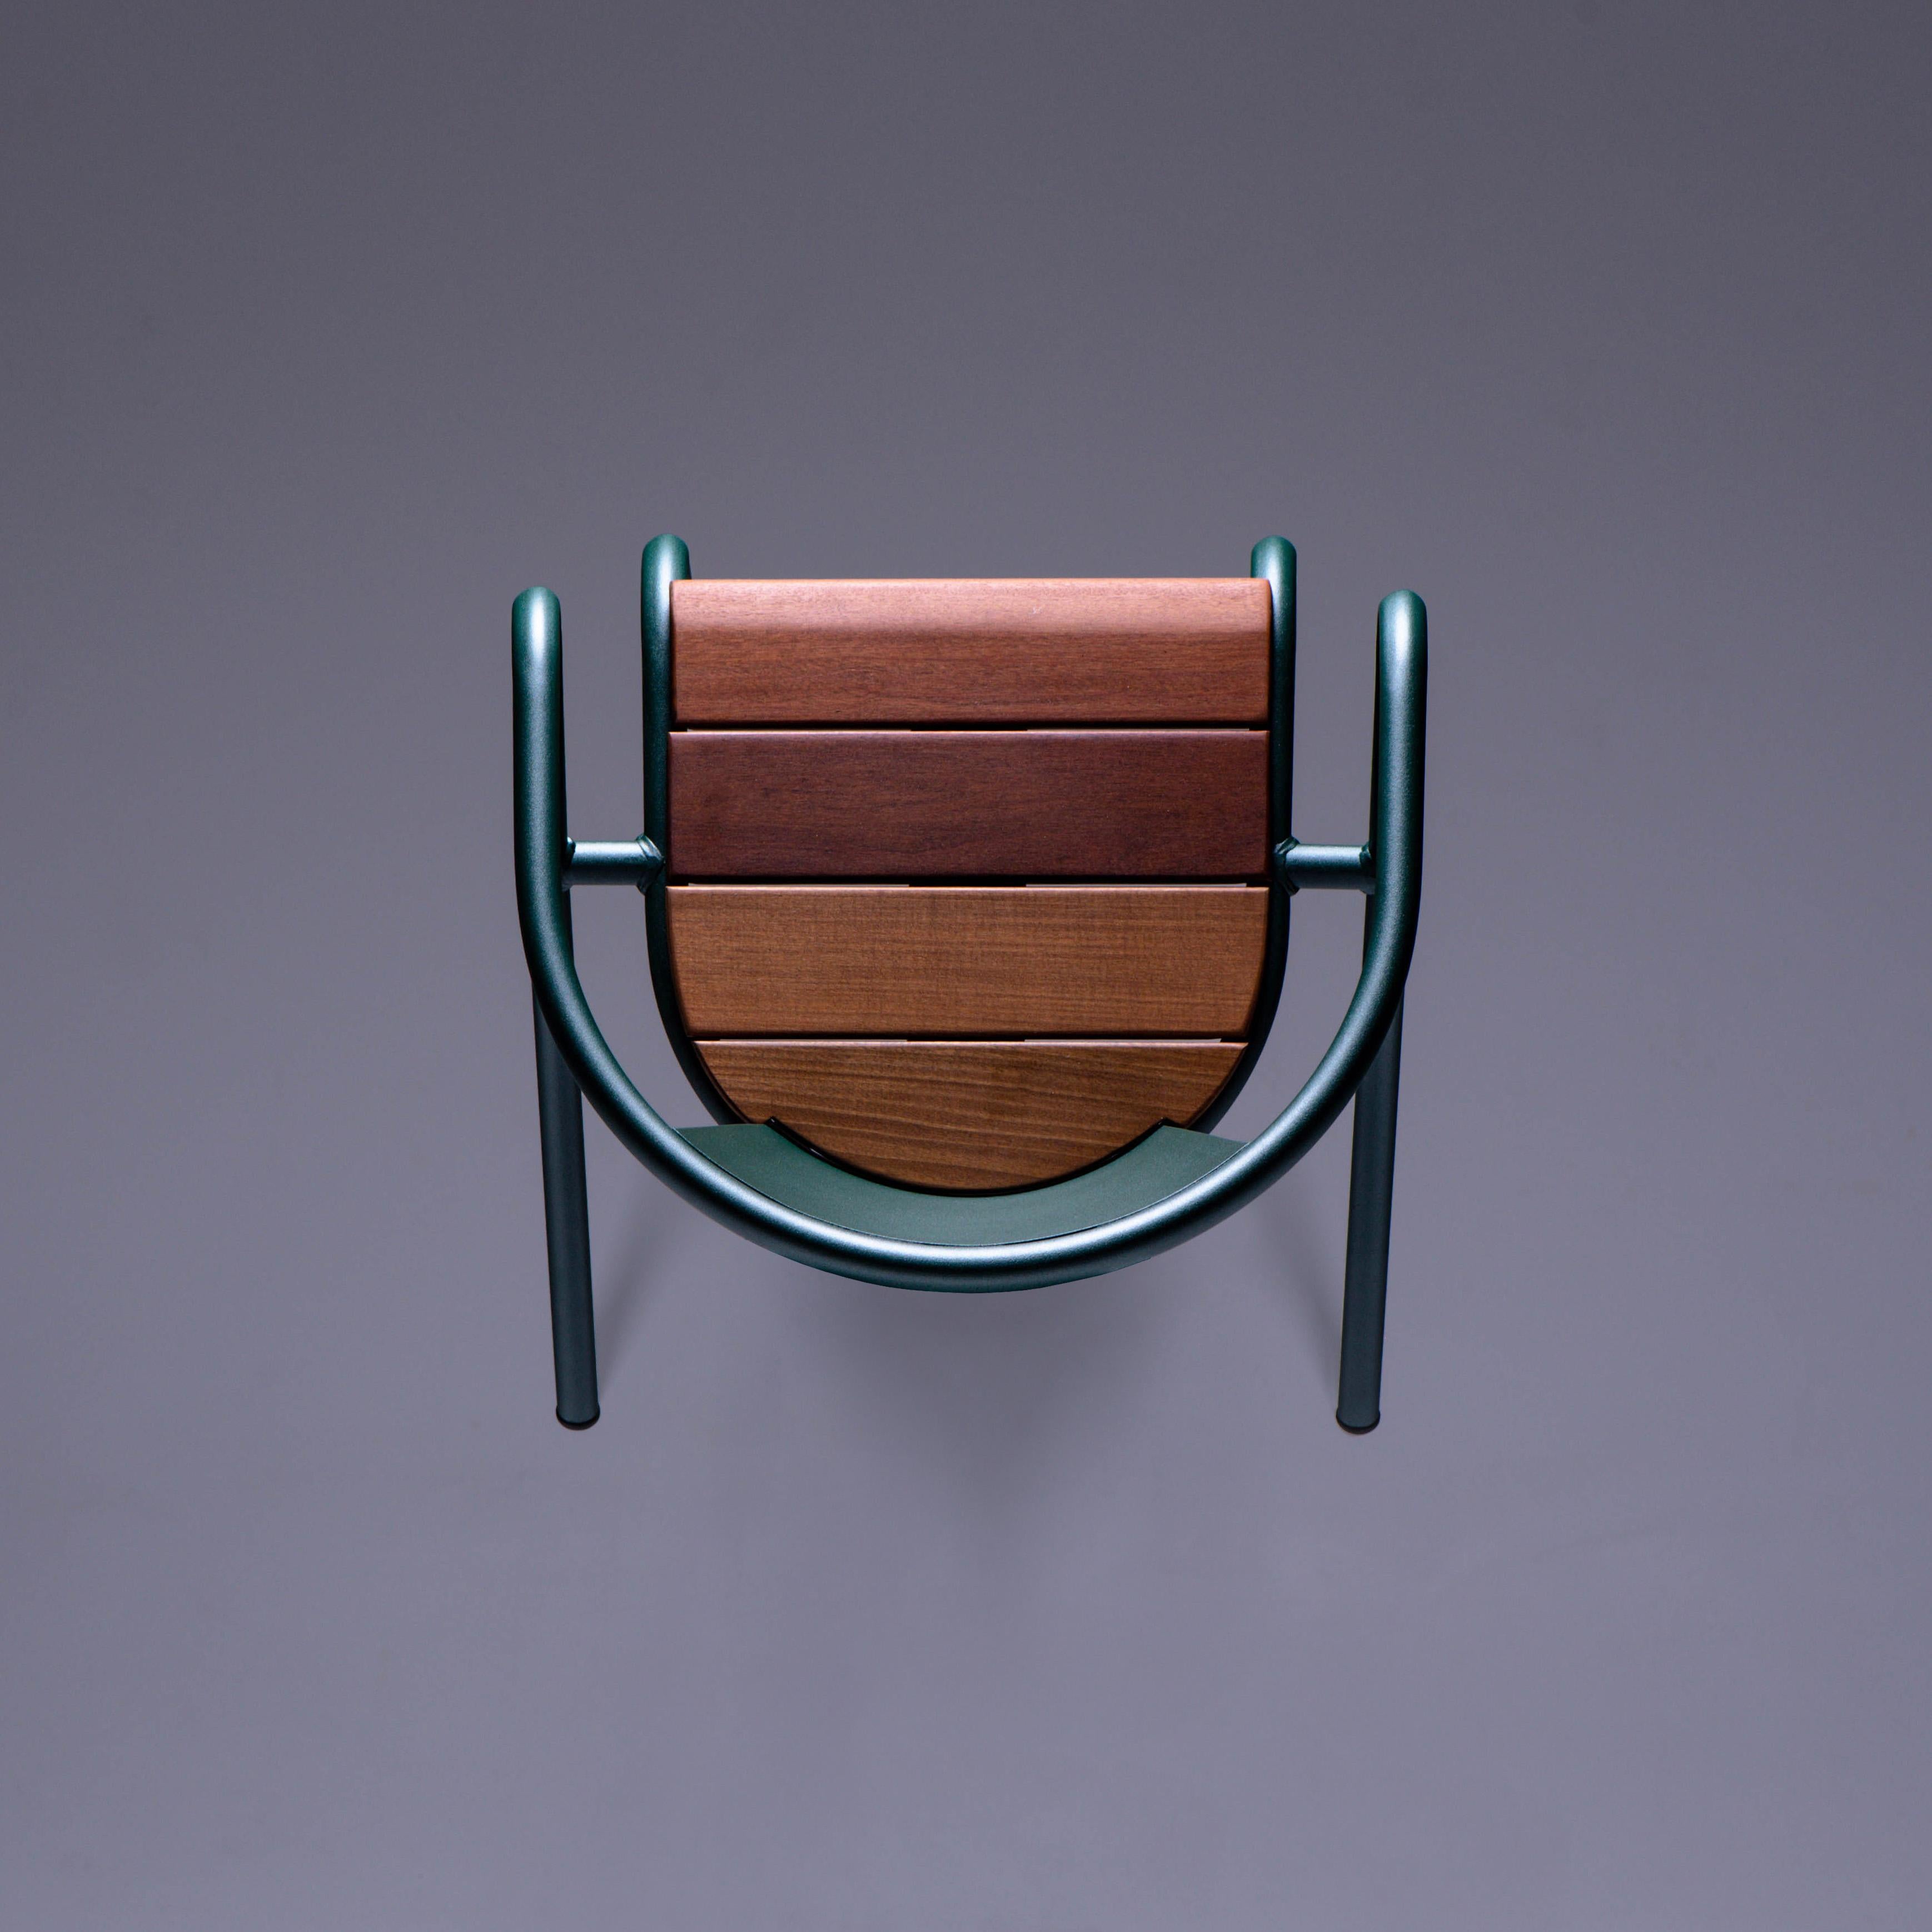 BICA chair is a sustainable stackable steel armchair made for the outdoors from recycled and recyclable steel and finished with our premium selection of powder-coating colors, in this case in a rich dark Green color, that transforms a Classic in